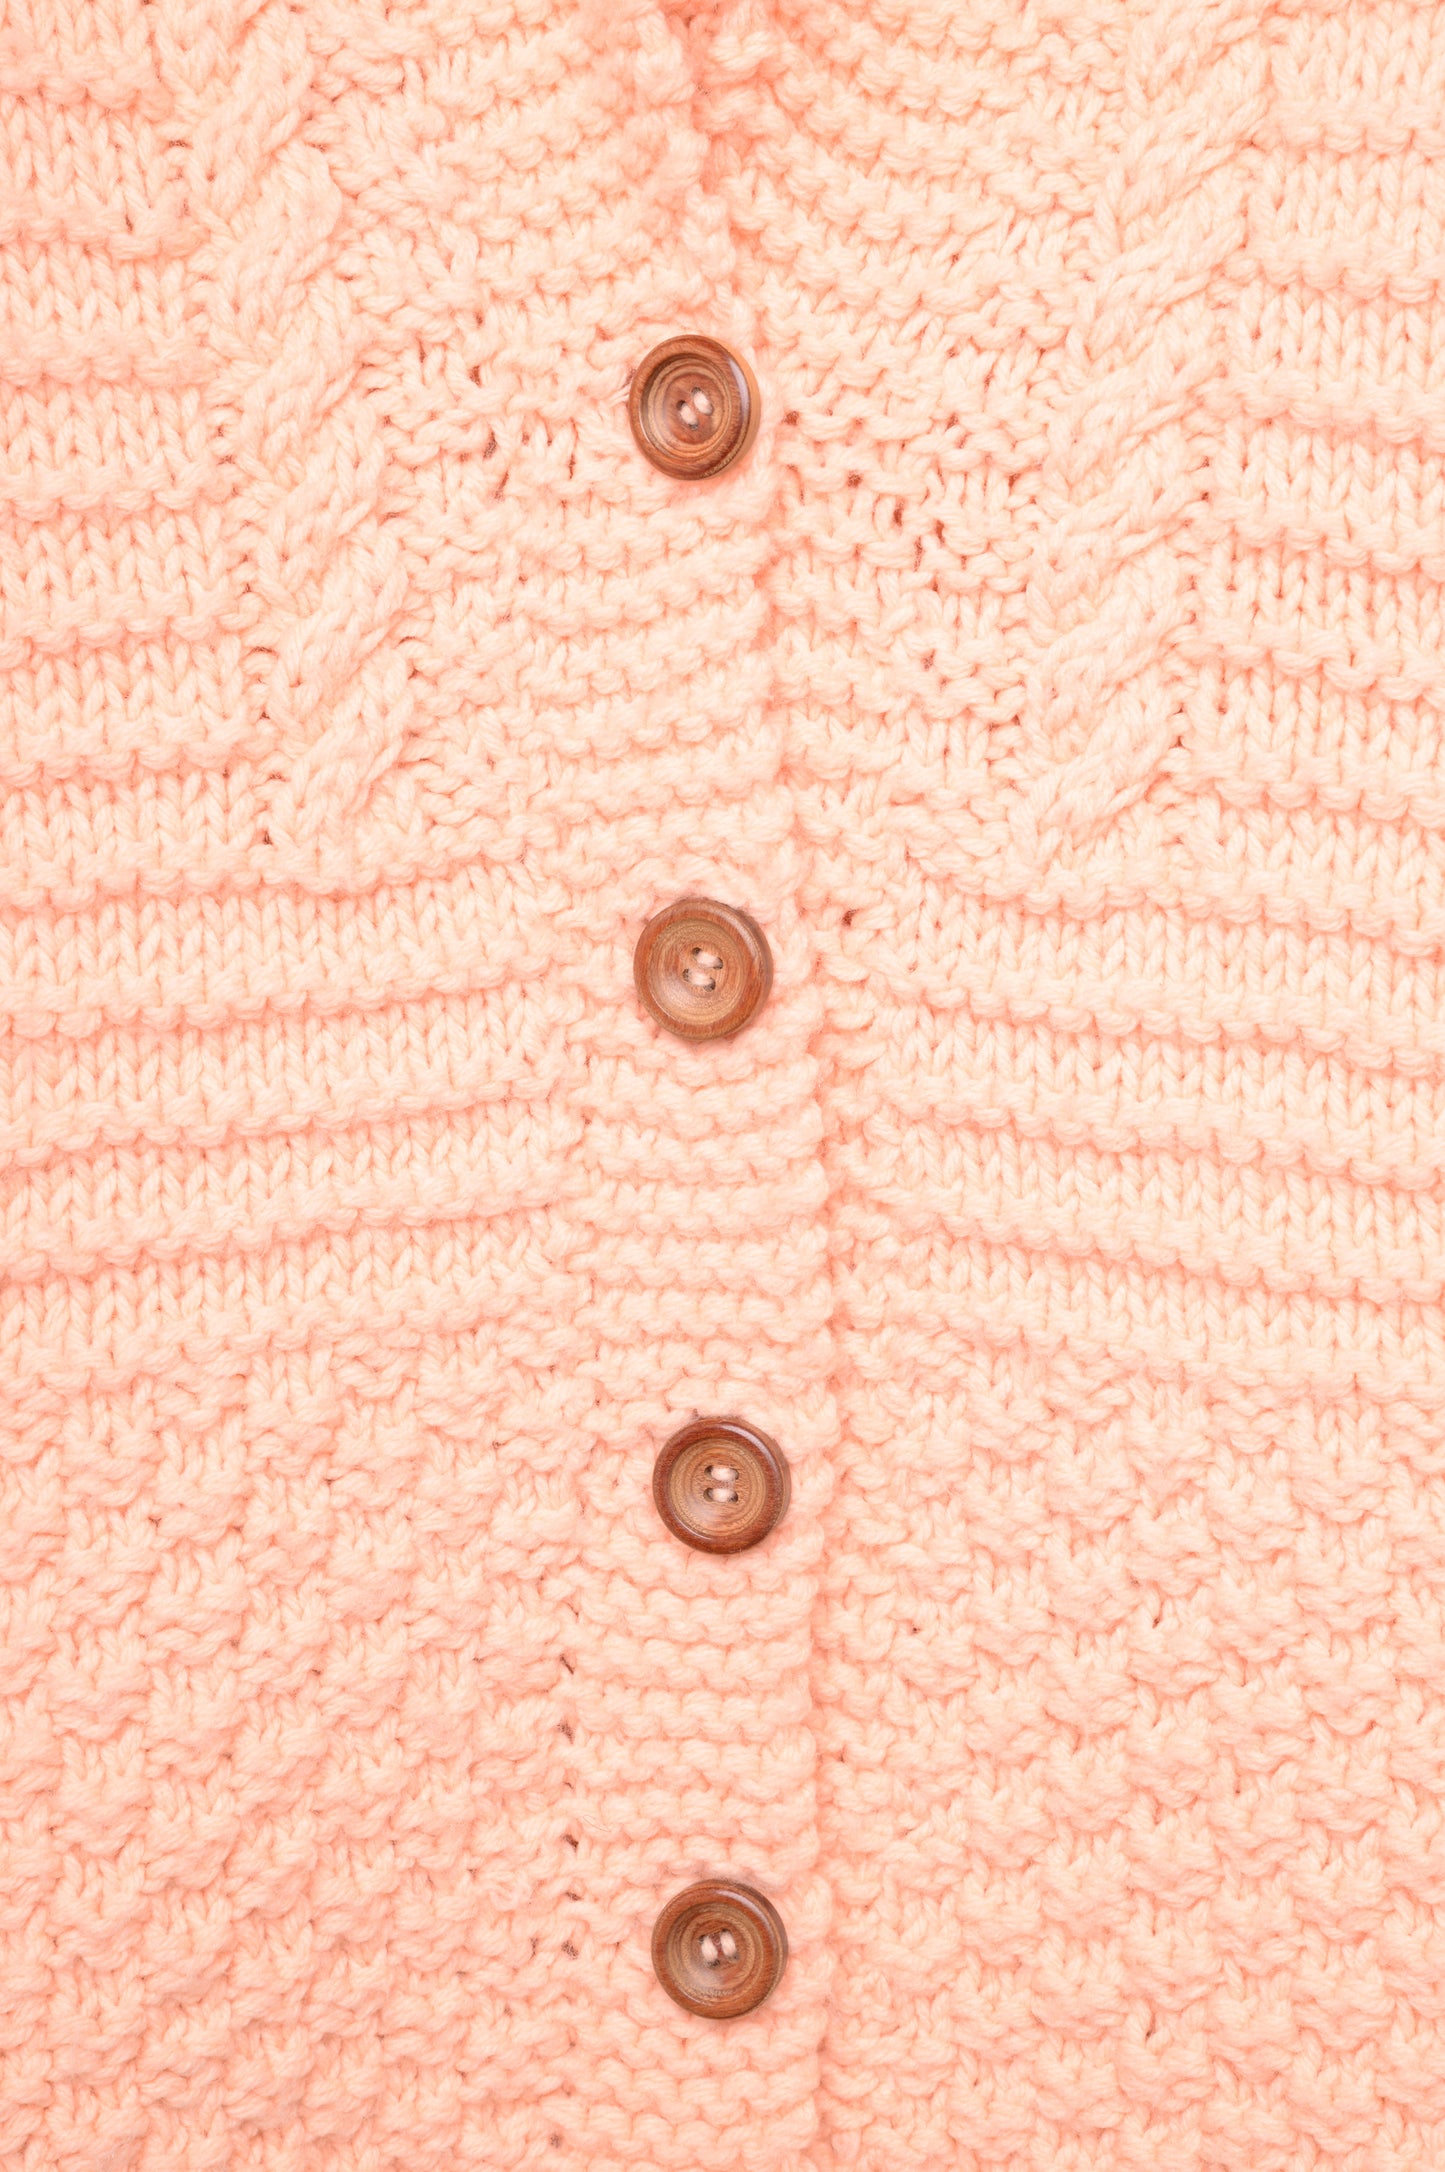 Peach Cable Knit Cardigan Jacket